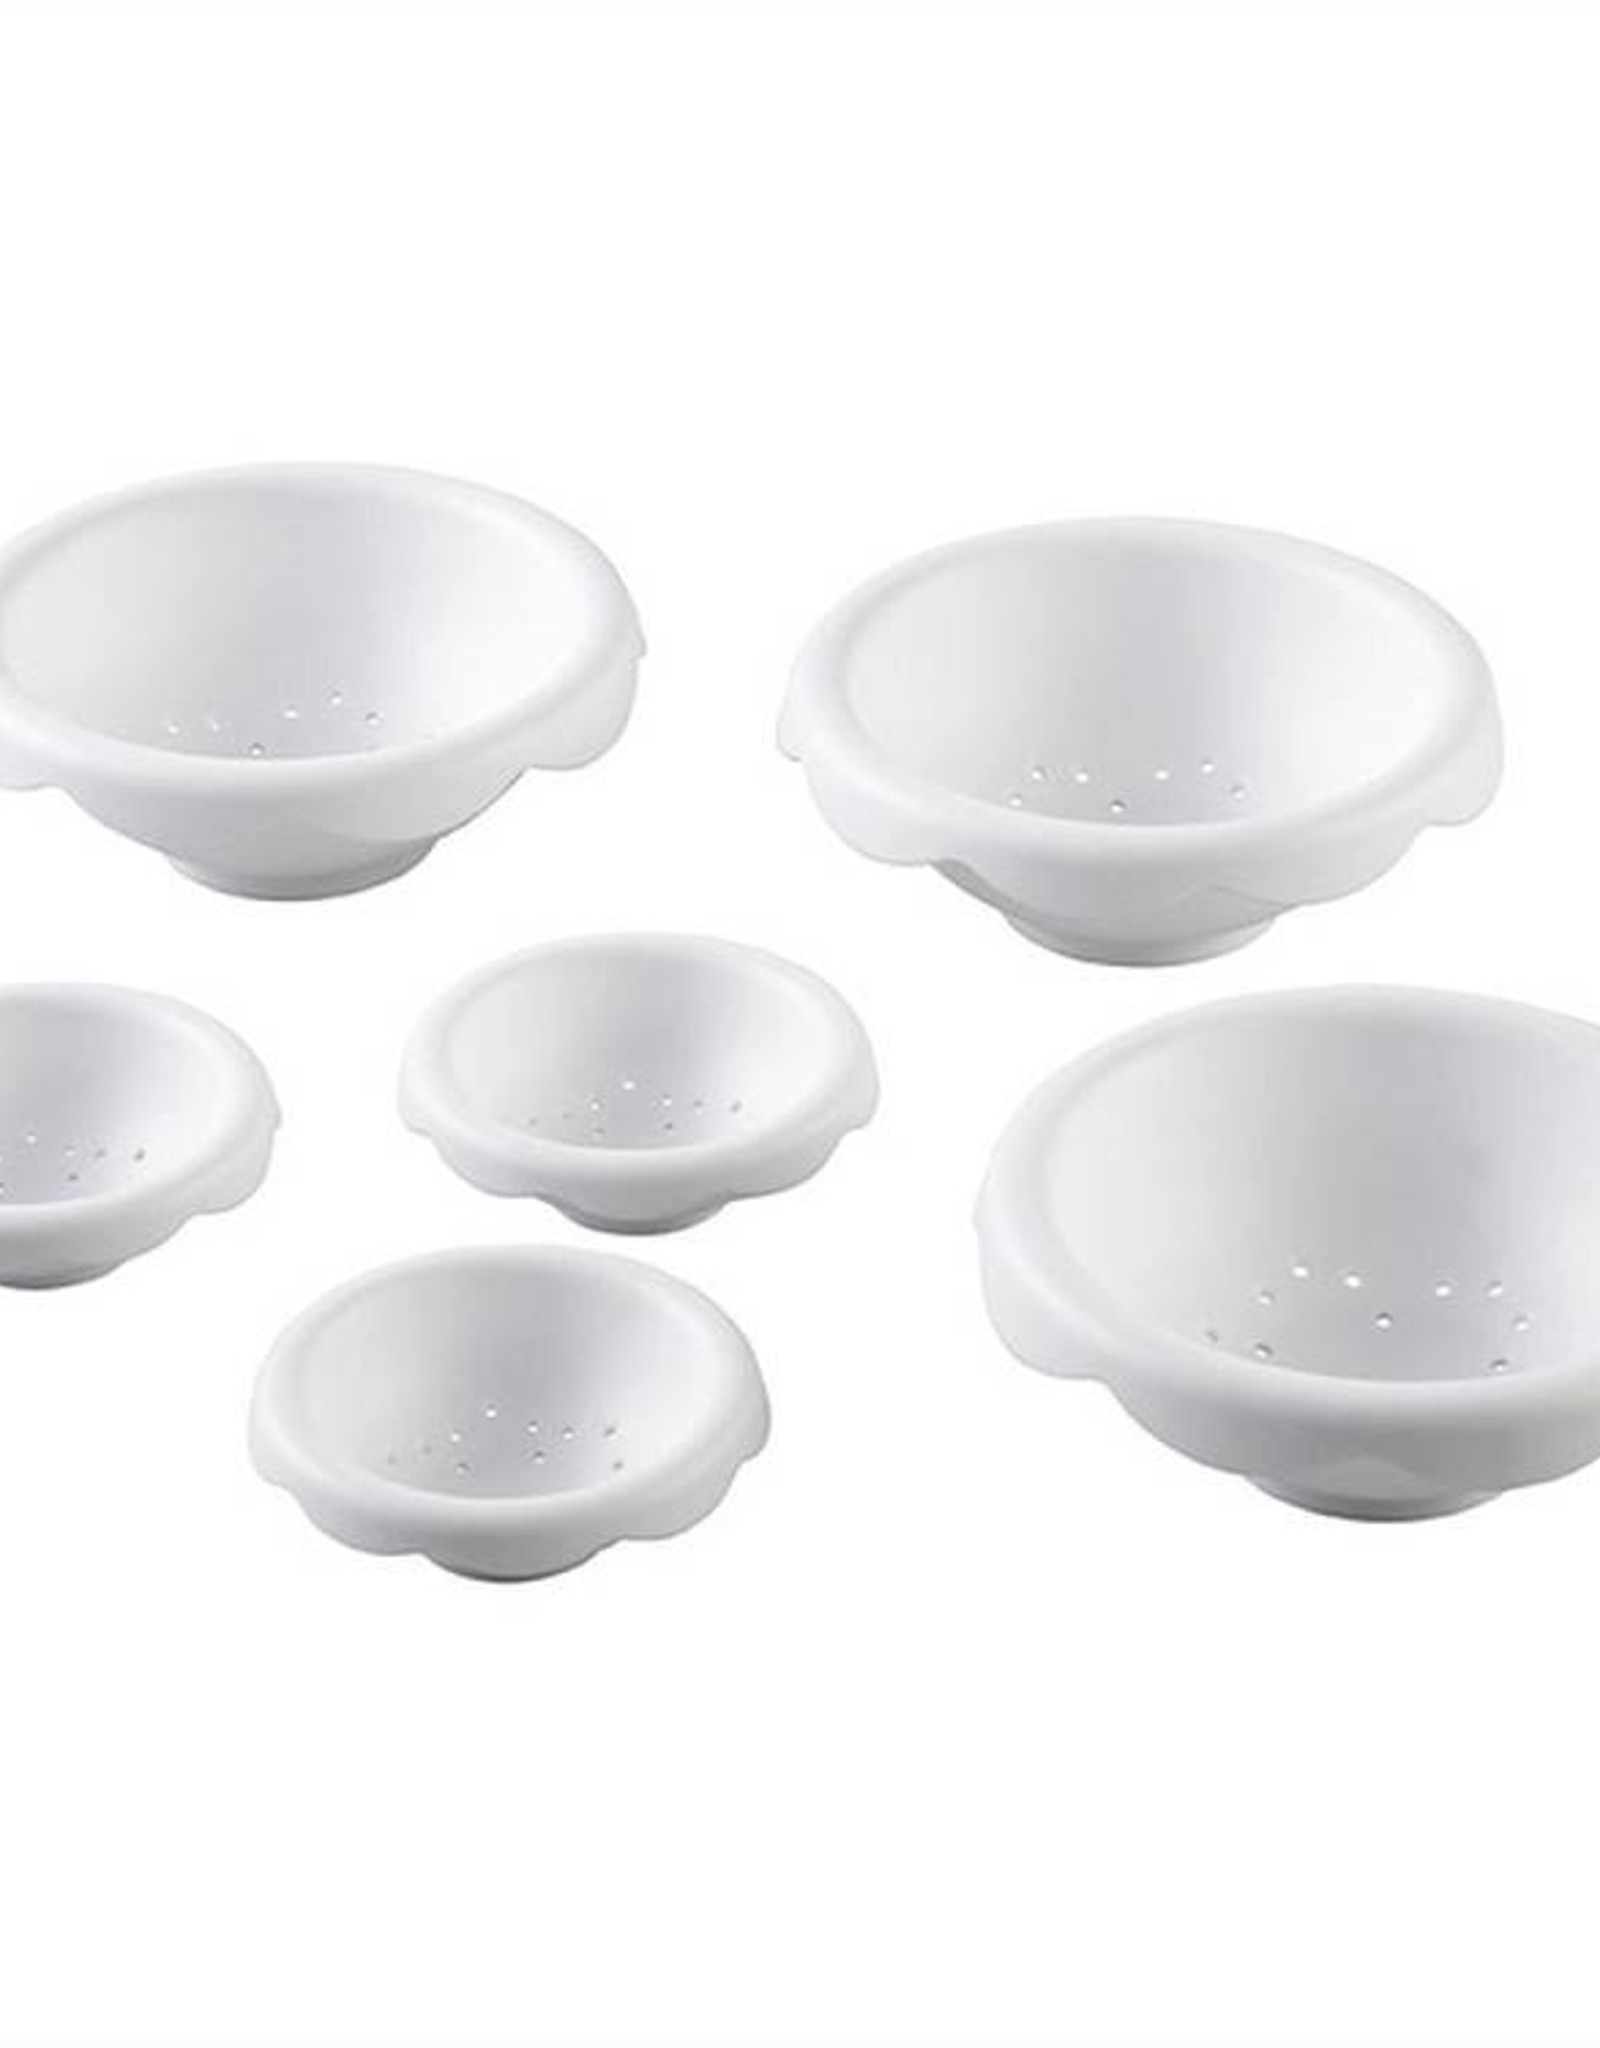 Flower Shaping Bowls (6 pieces)